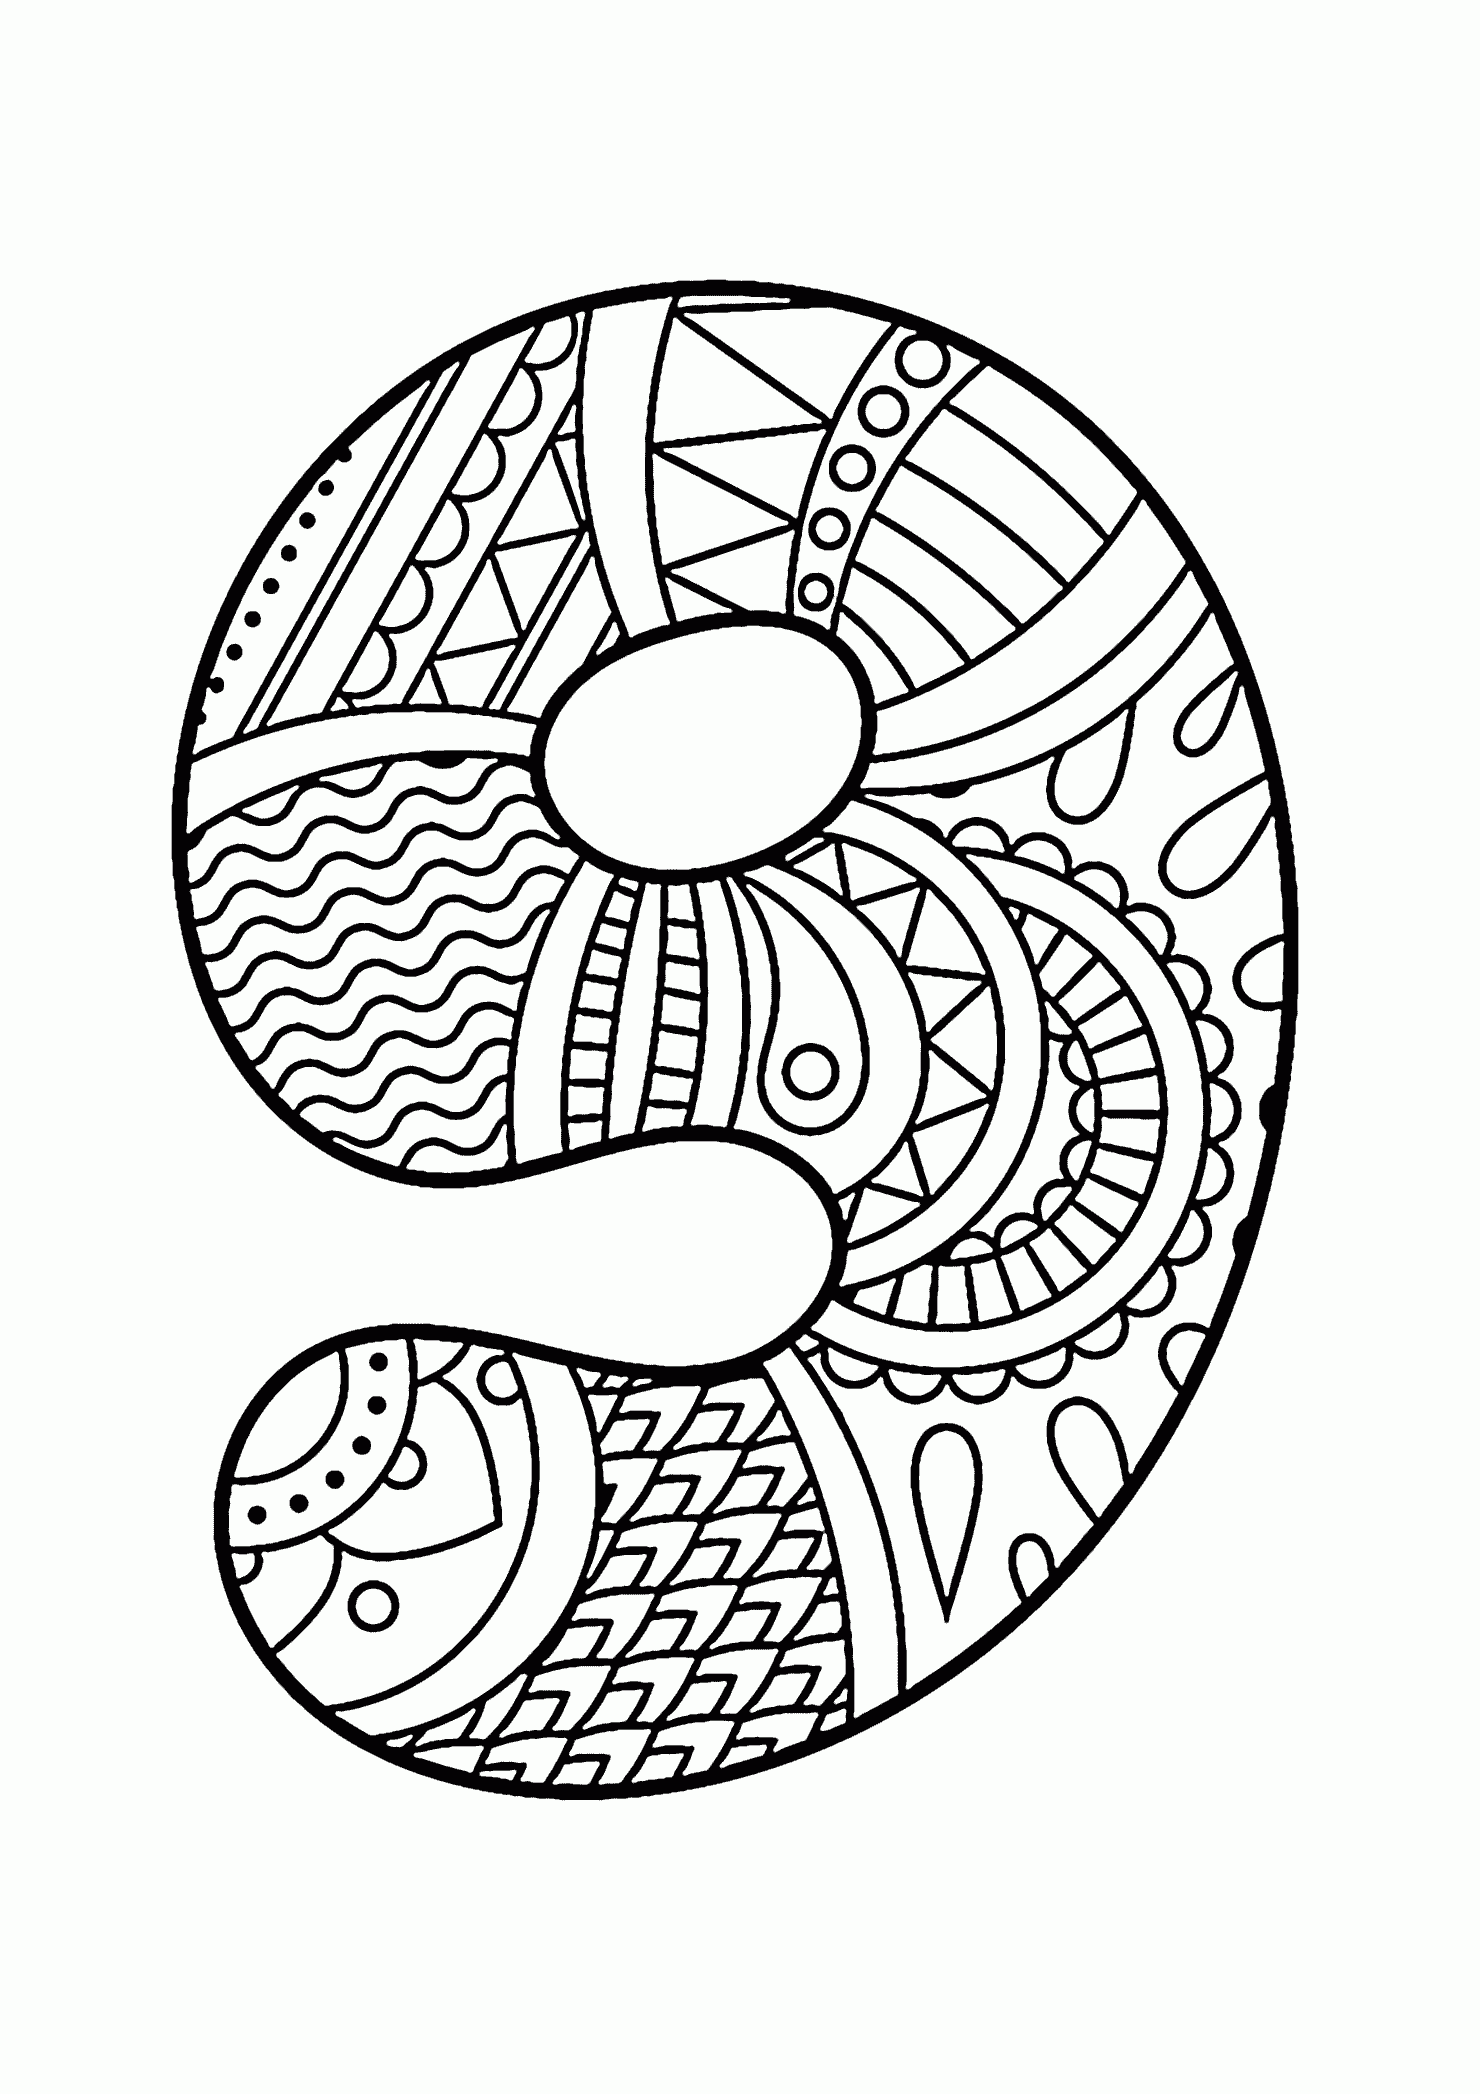 9 colouring pages number 9 coloring page getcoloringpagescom colouring pages 9 